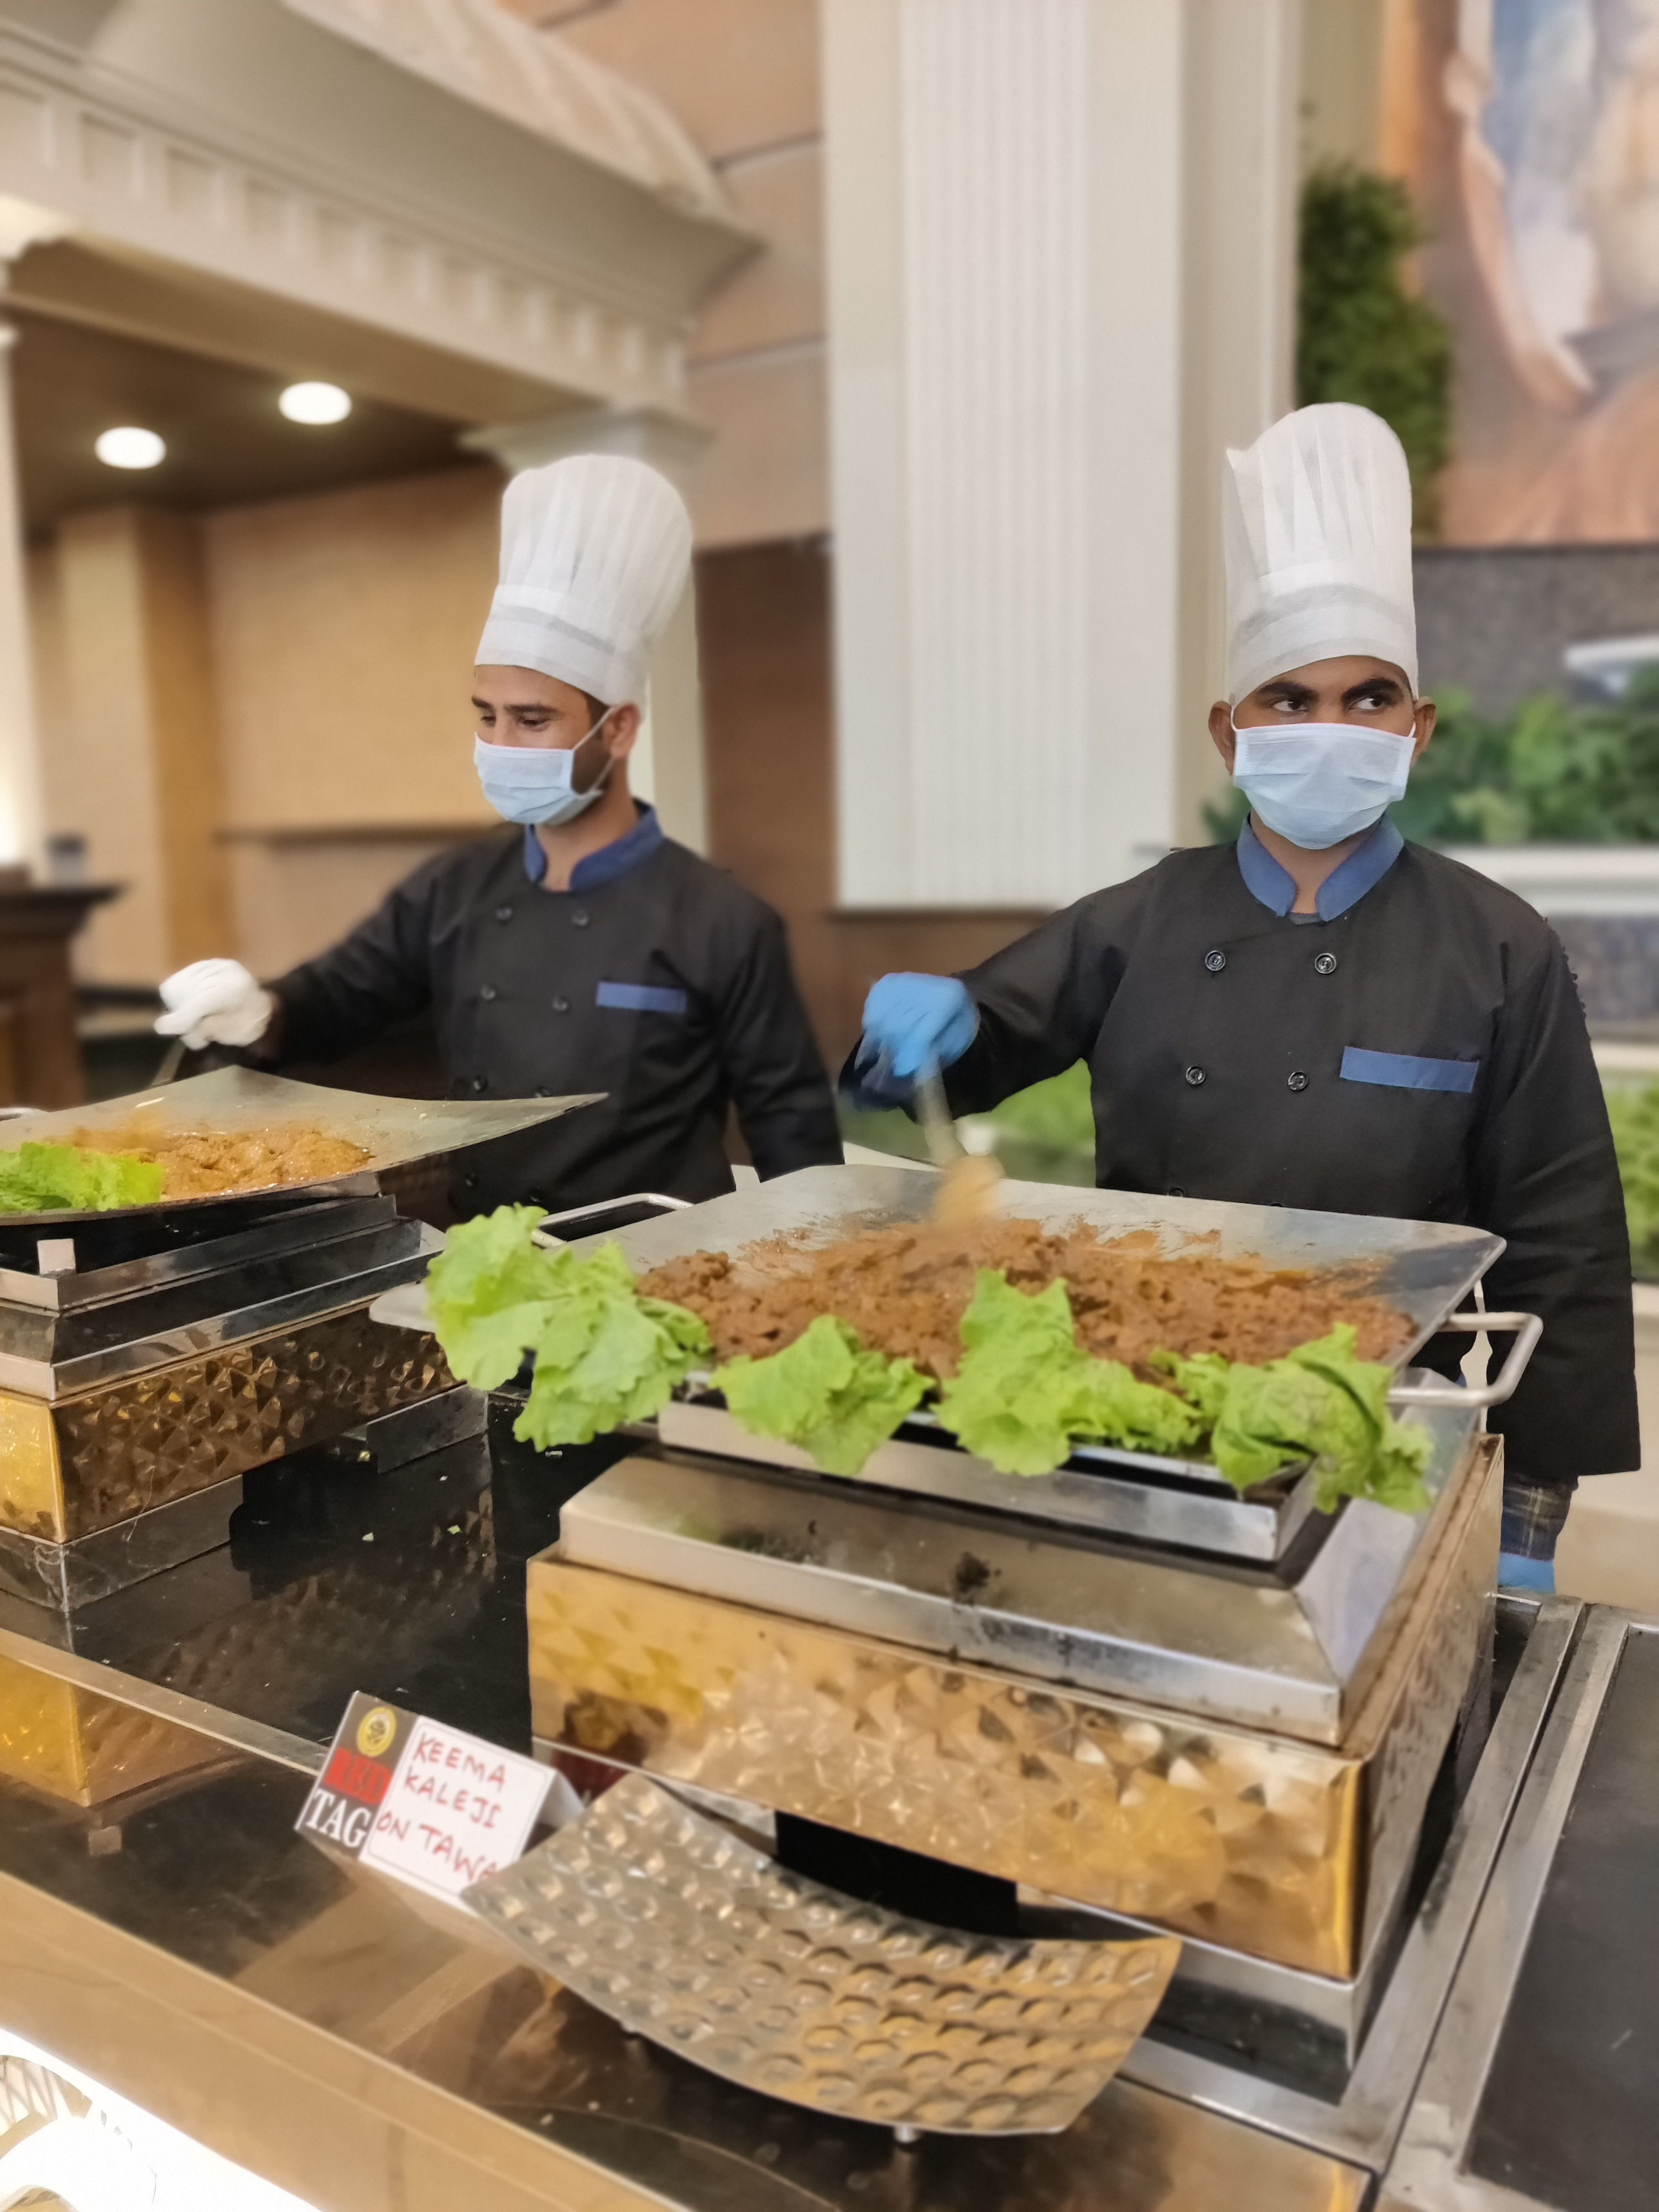 BEST CATERERS IN CHANDIGARH INDIA  | Red Tag Caterers | Best catering services in chandigarh,top caterer in chandigarh, exclusive catering in chandigarh, premium catering services in chandigarh, - GL116035